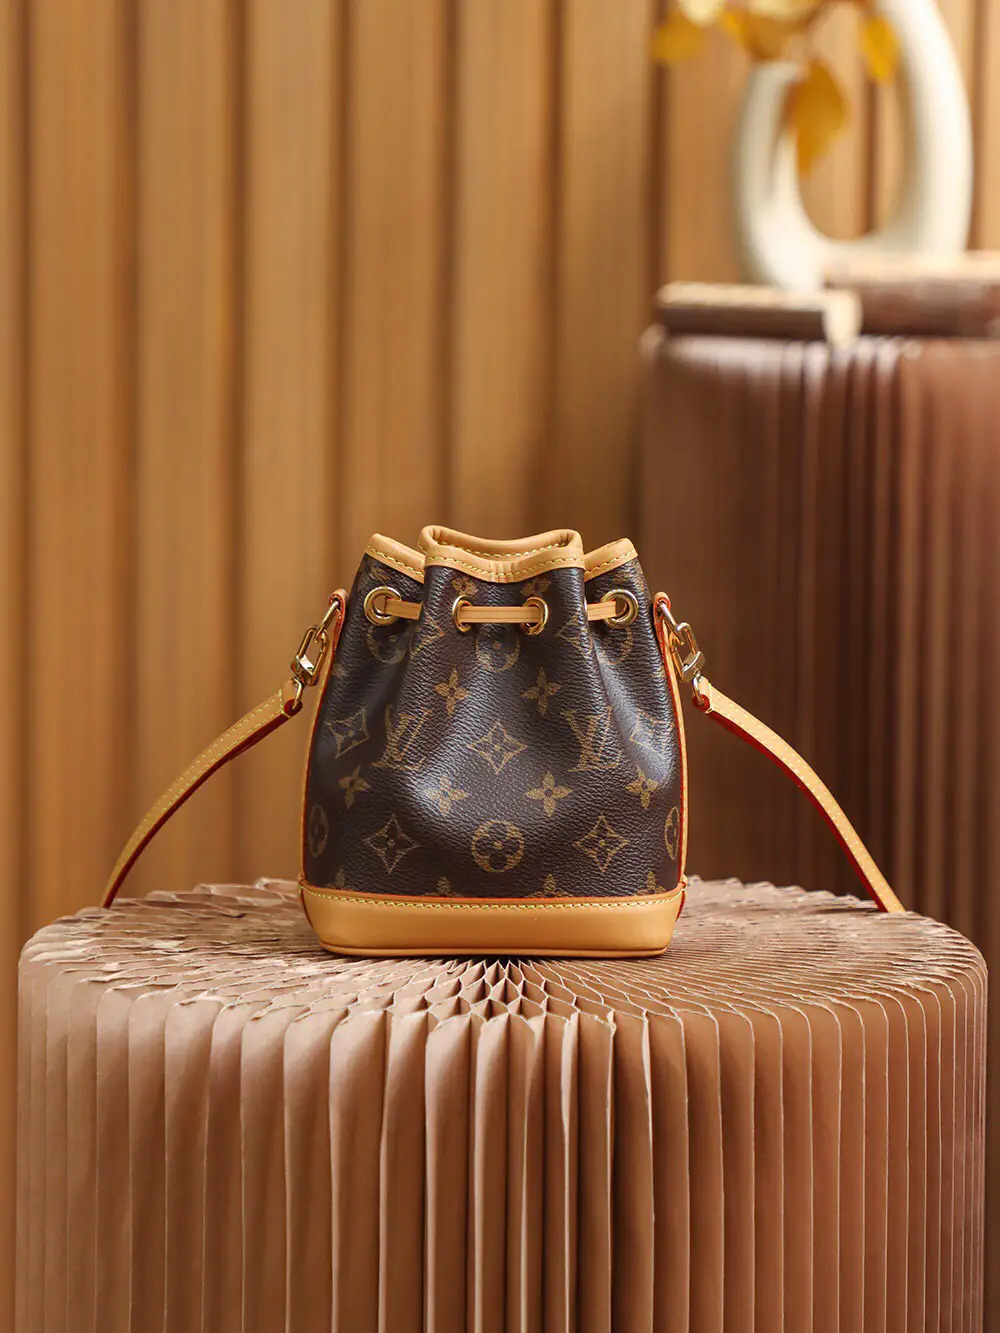 Lv wild bucket bag Super high cost performance This is a great bag